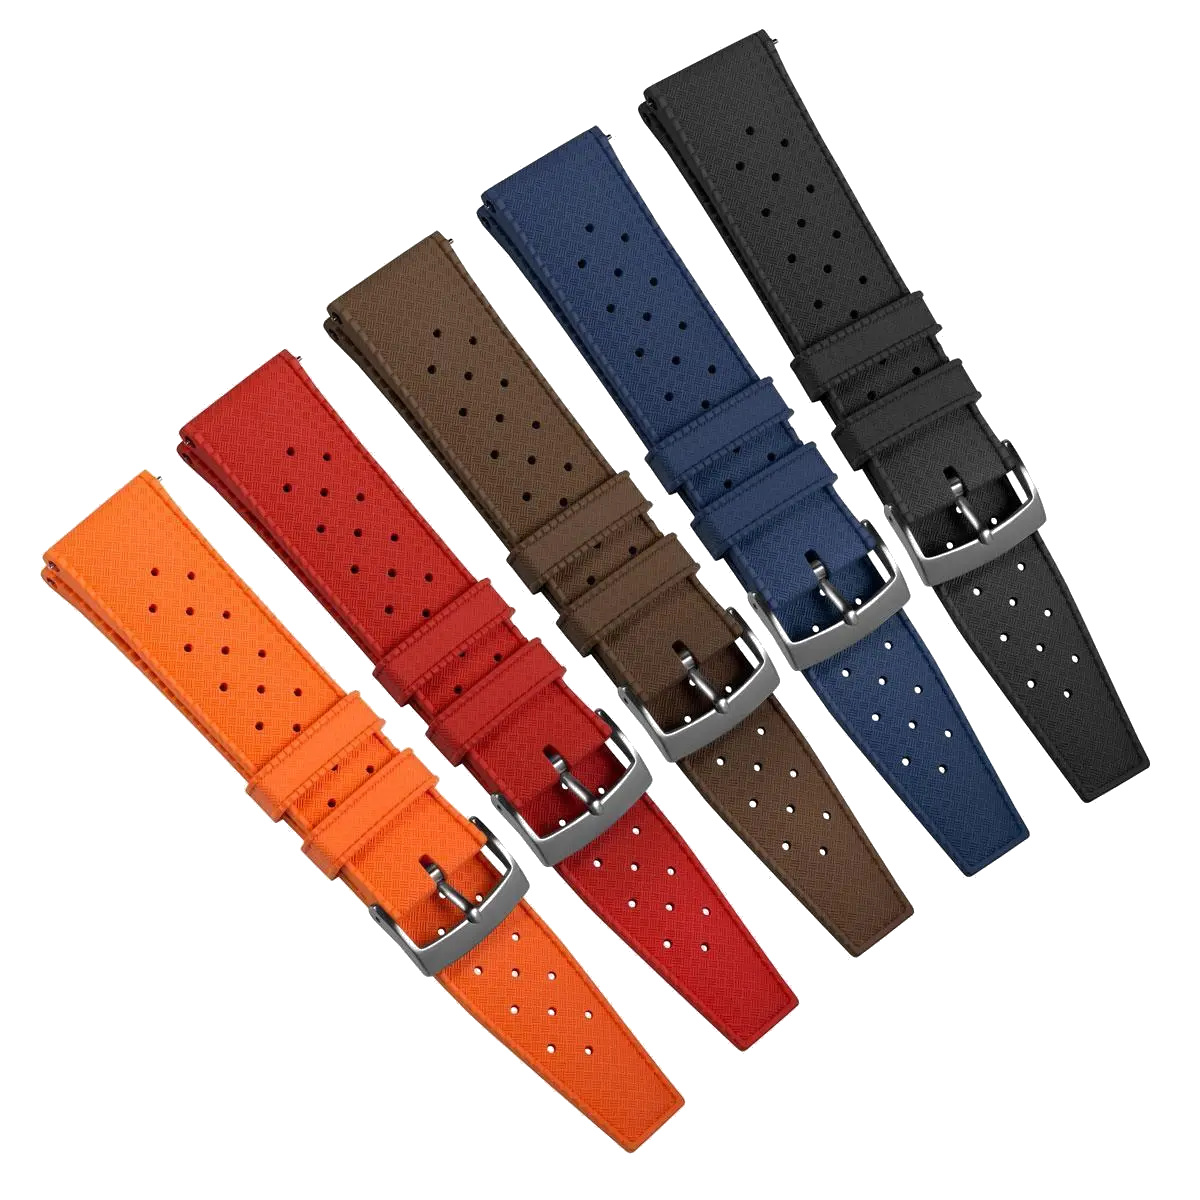 5 Extra Watch Bands Package